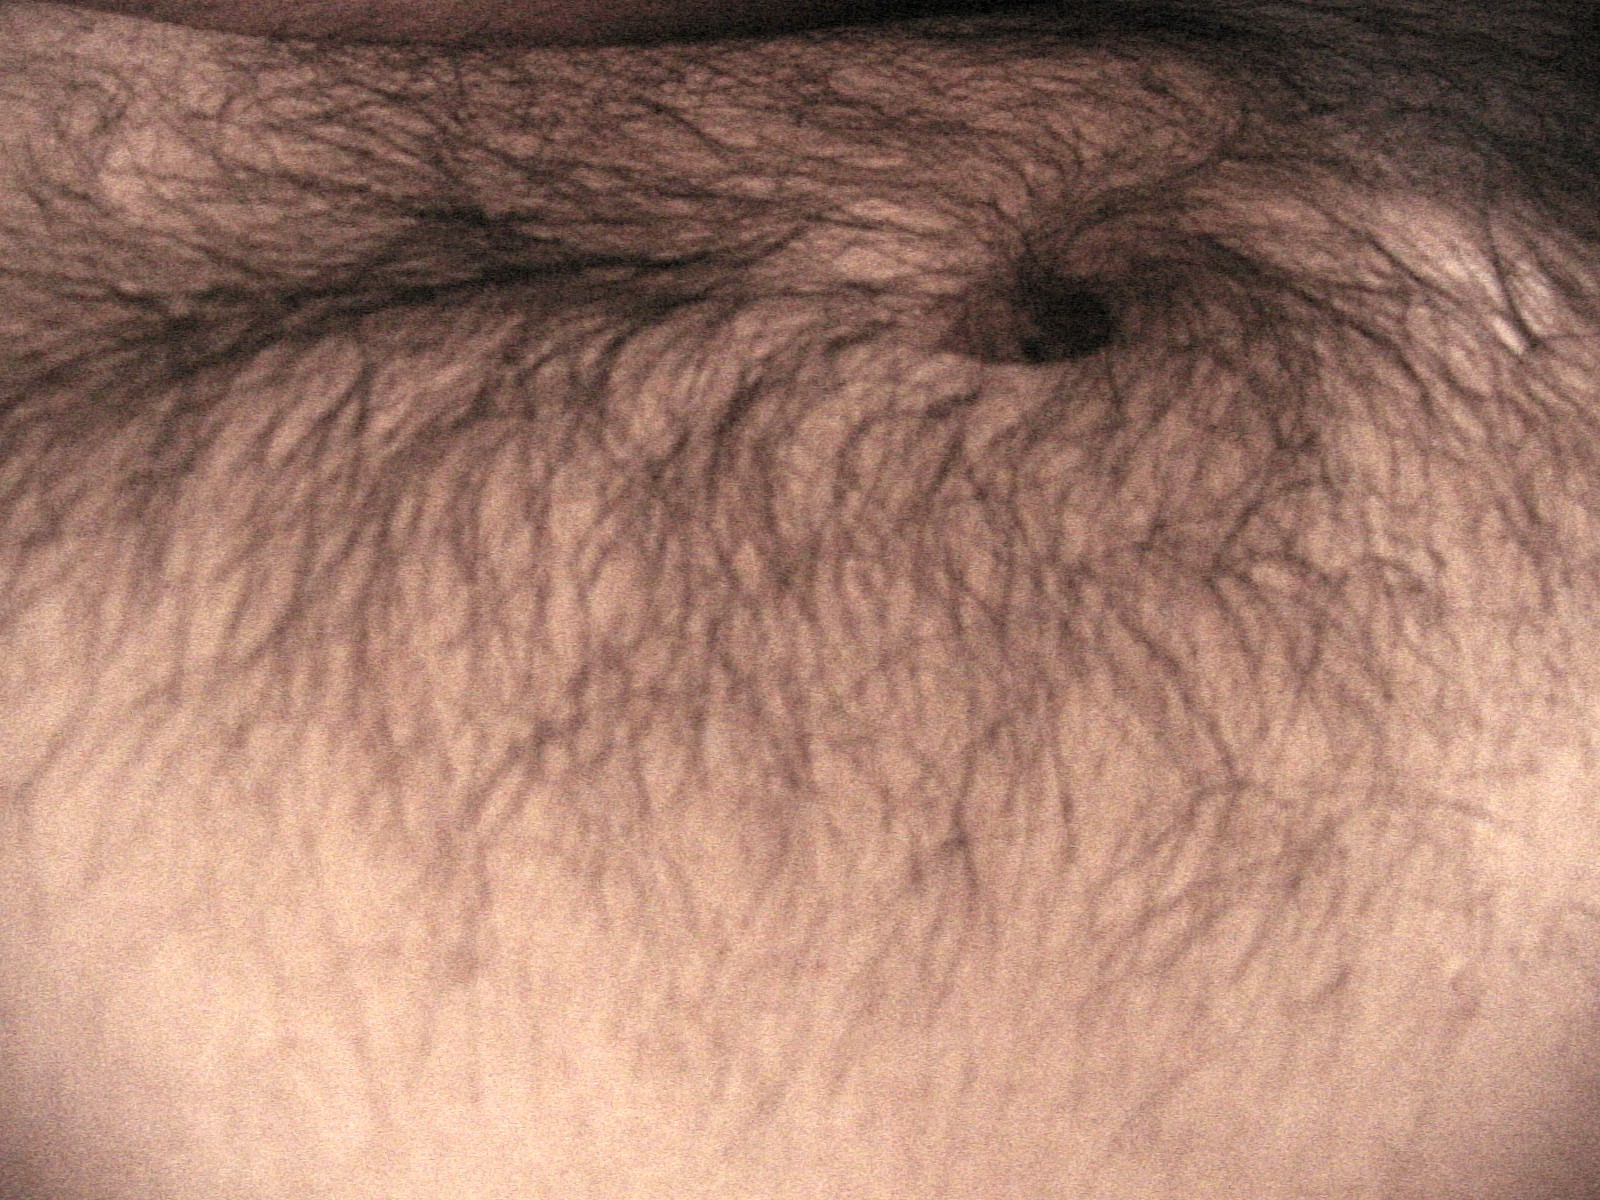 People: skin-chest-hairy-male-human-adult-belly-button-